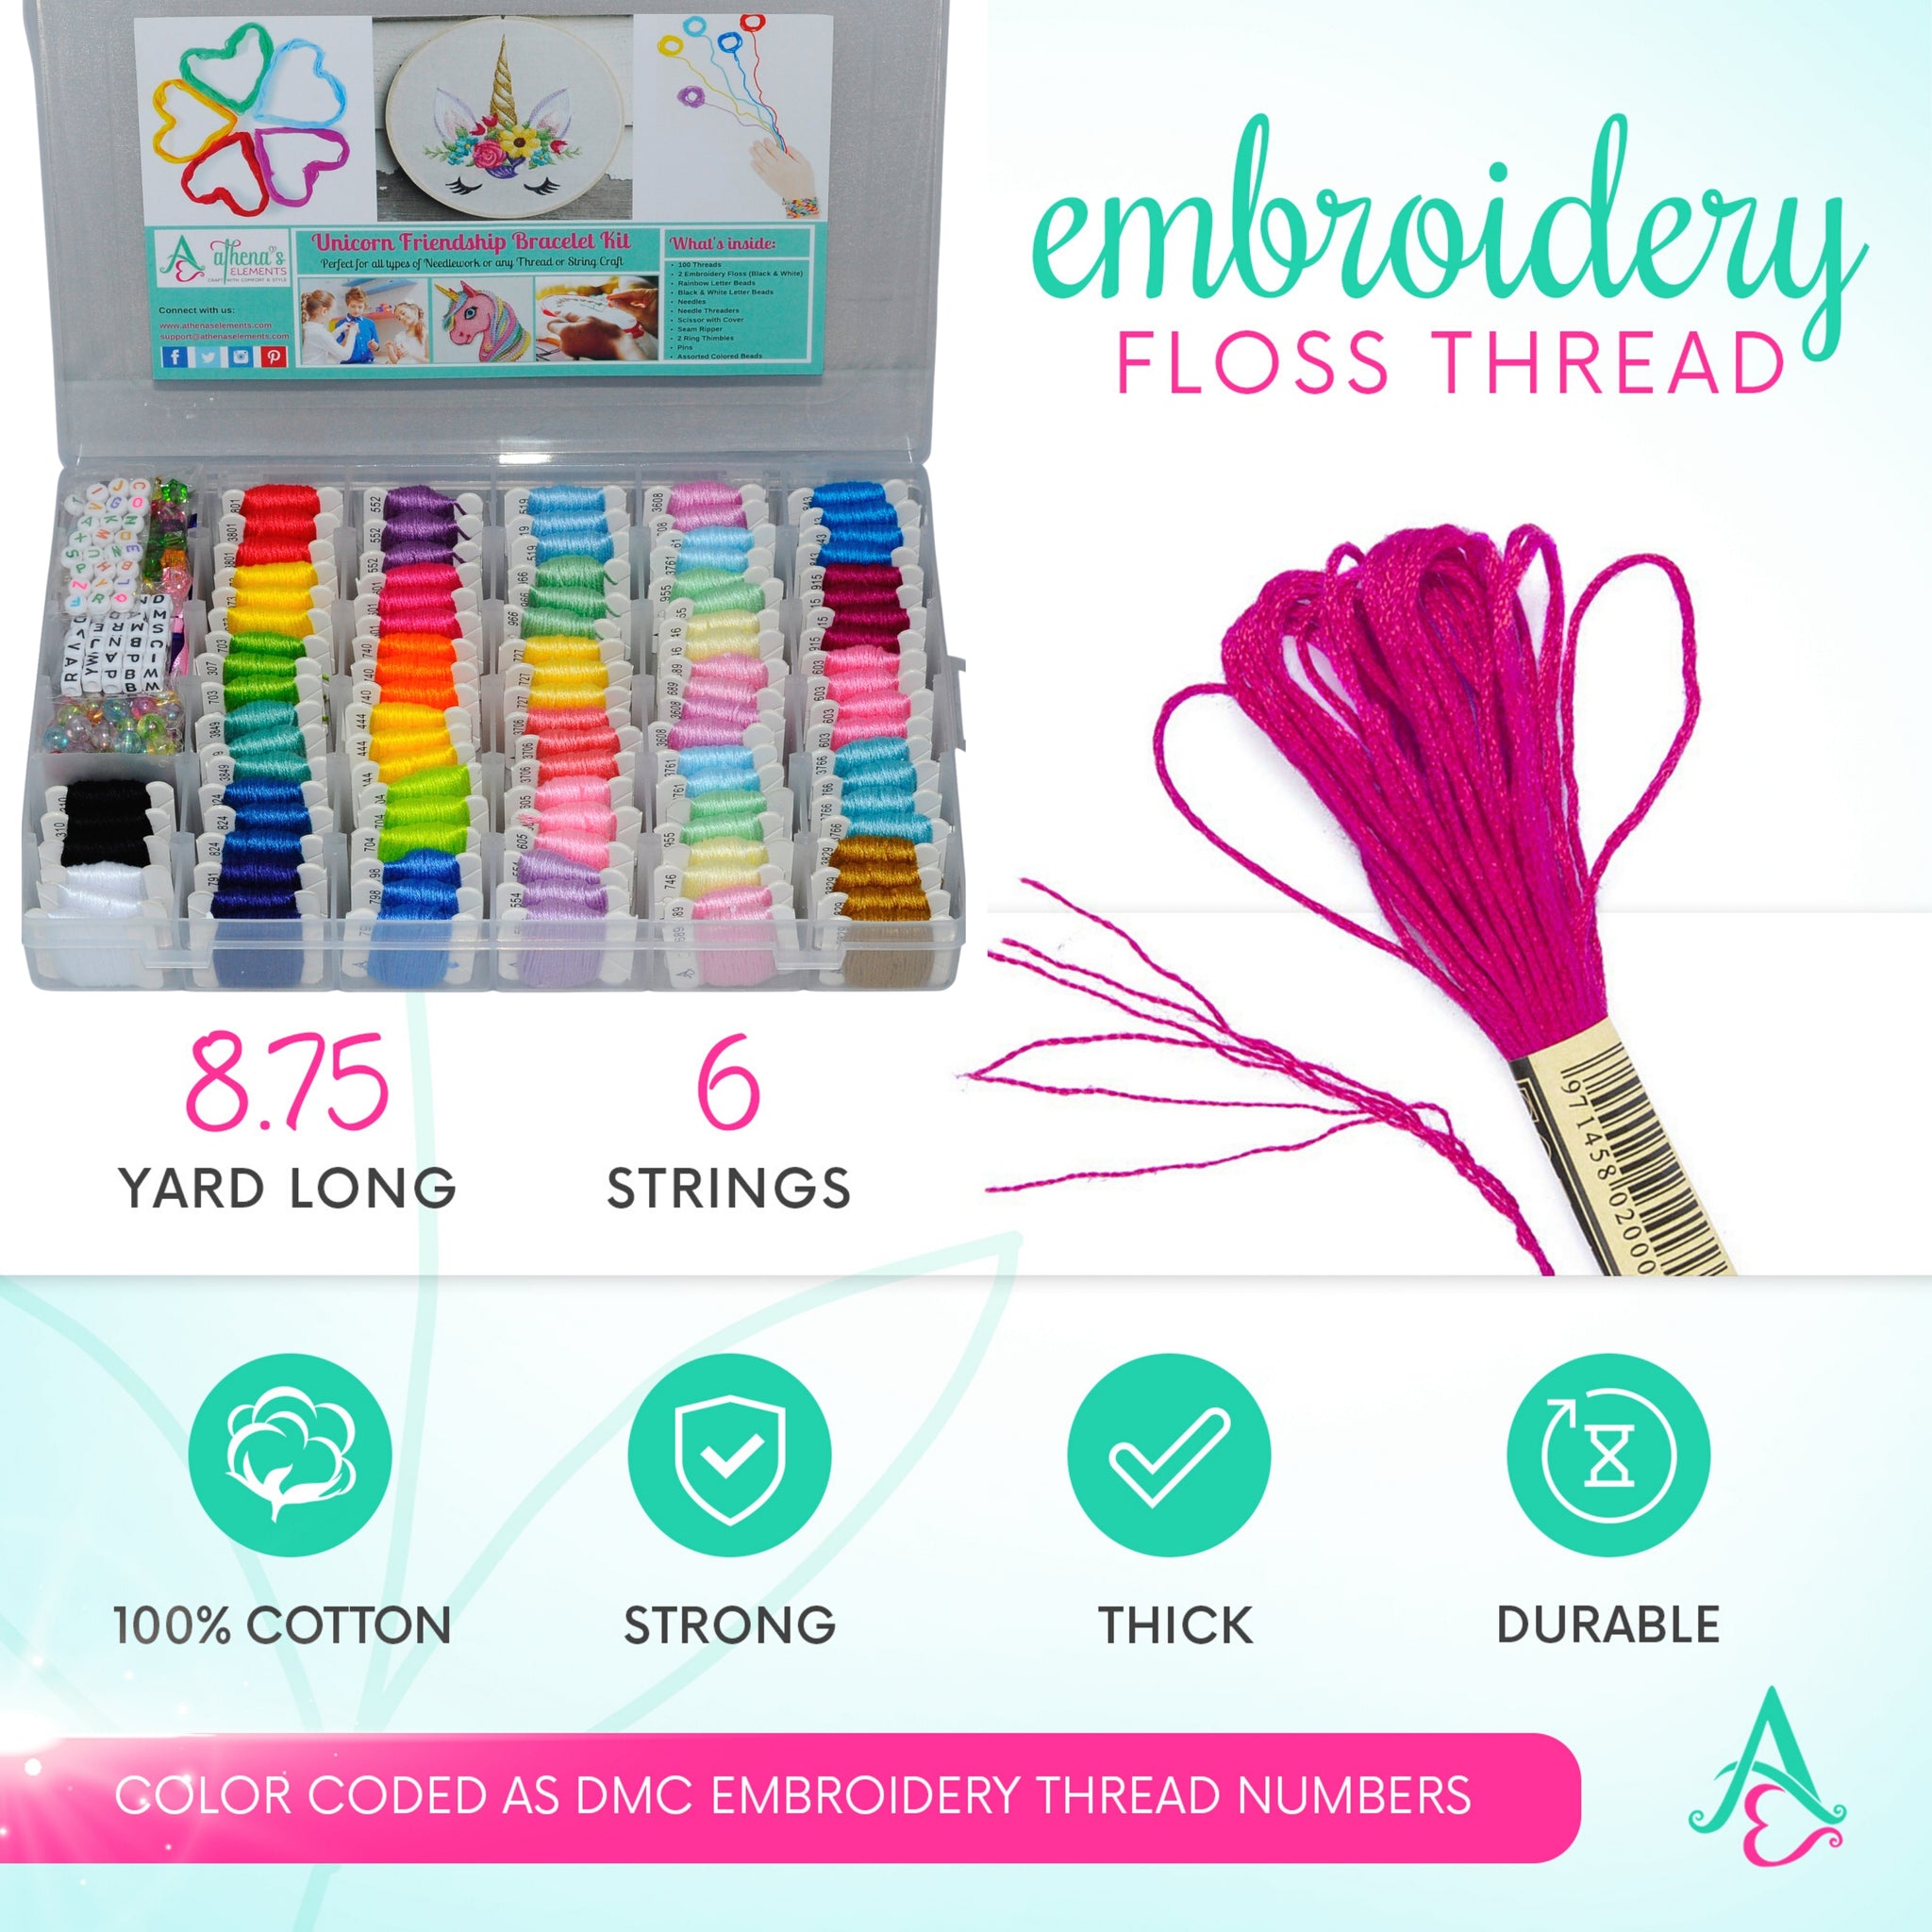 Friendship Bracelet String Kit - Cross Stitch Hand Embroidery Floss Set with Organizer Box for Beginners. Friendship Bracelet Kit for Adults.